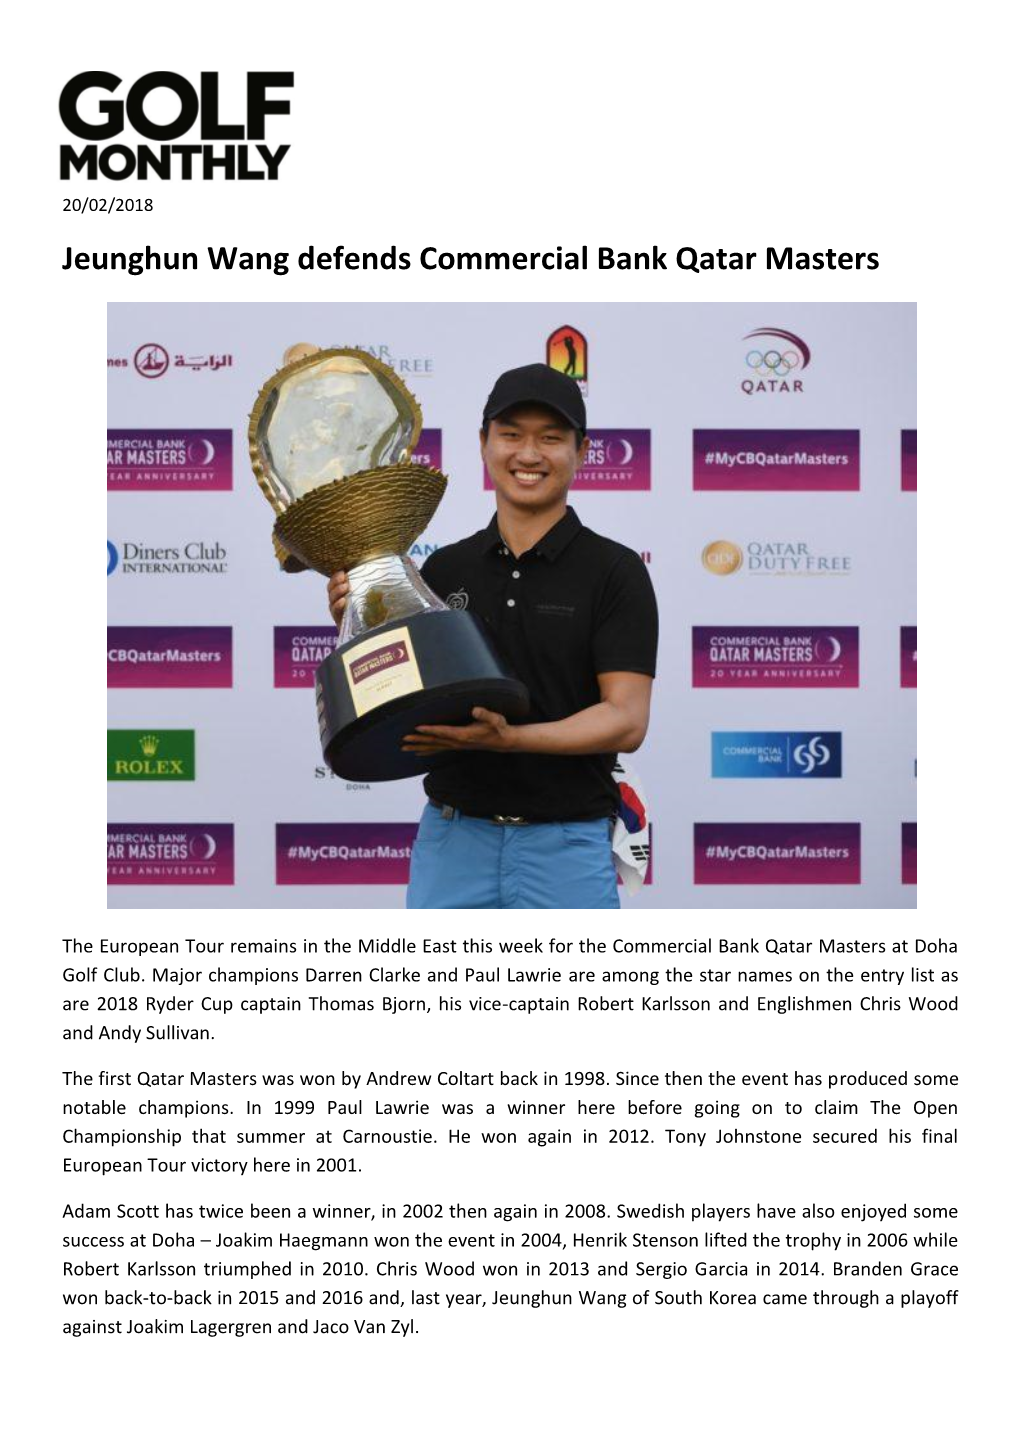 Jeunghun Wang Defends Commercial Bank Qatar Masters